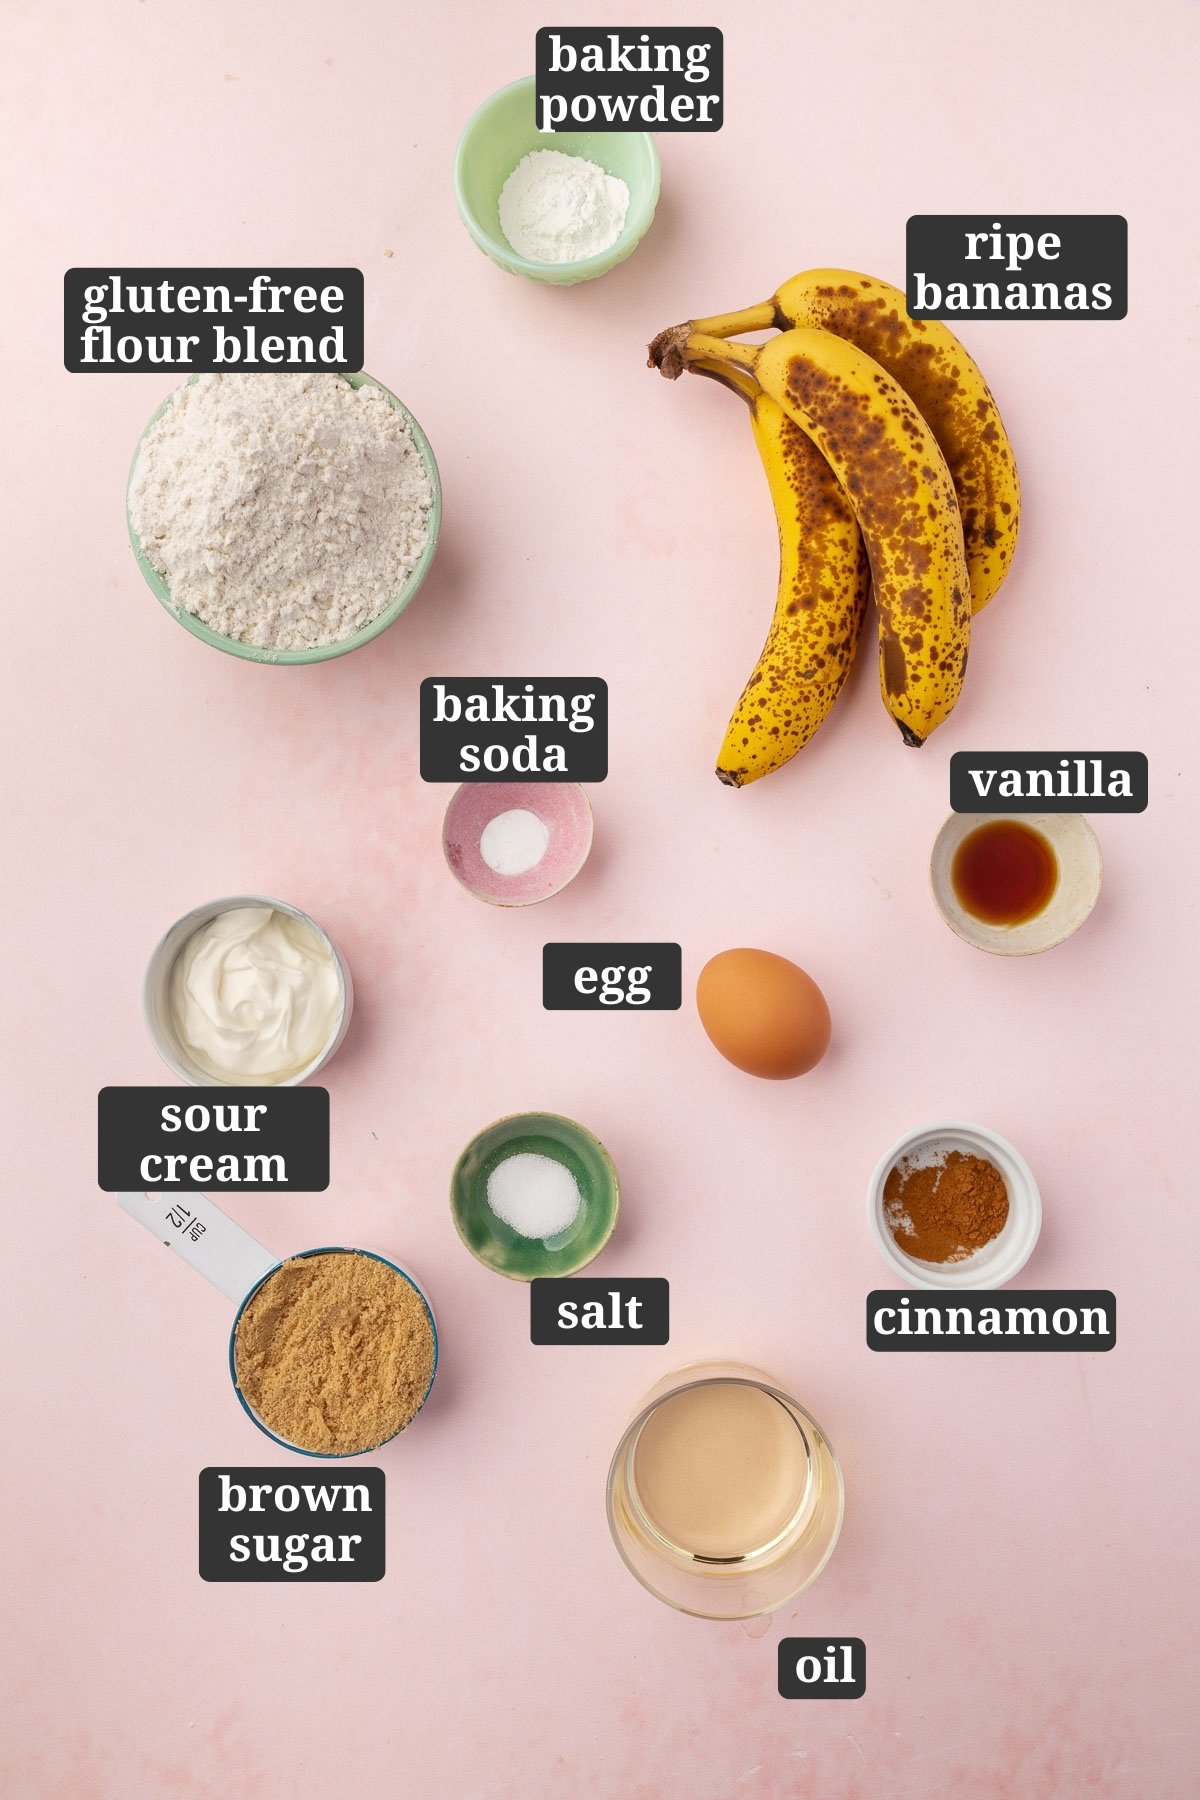 An overhead view of ingredients to make gluten free banana muffins, including gluten-free flour, baking powder, ripe bananas, baking soda, vanilla, egg, sour cream, brown sugar, salt, cinnamon and oil with text overlays over each ingredient.